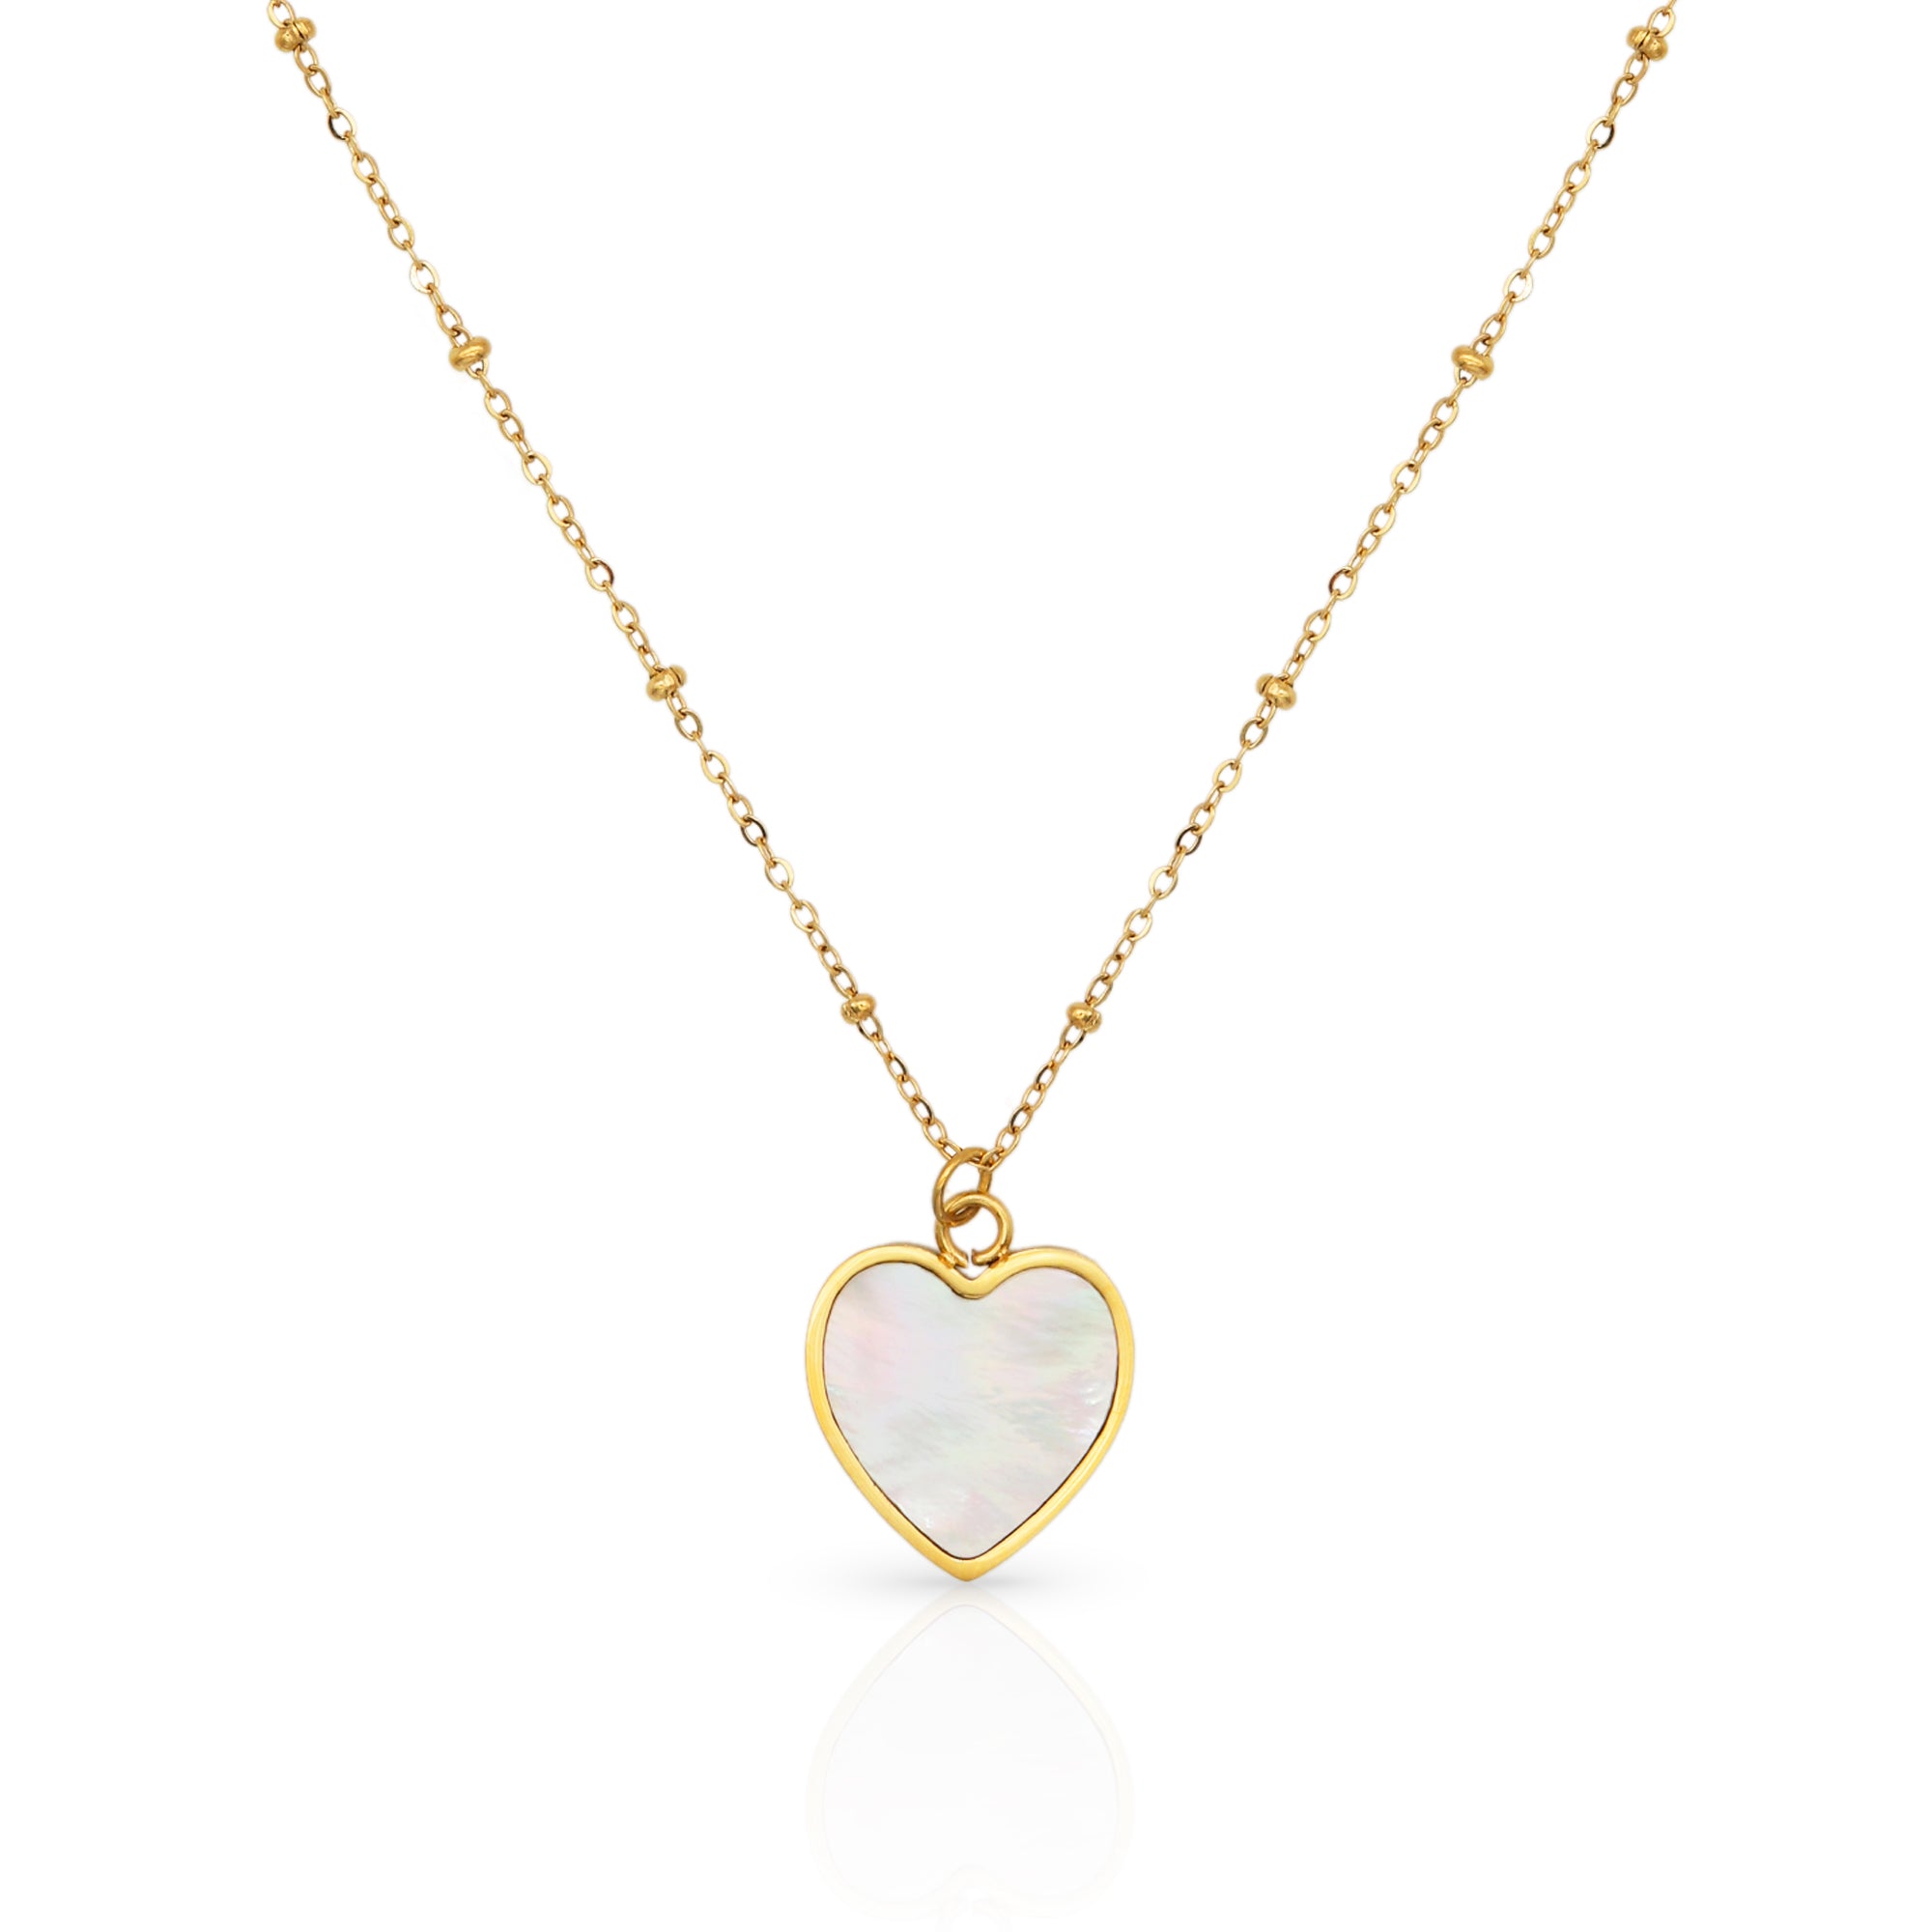 The Mother of Pearl Heart Gold Necklace